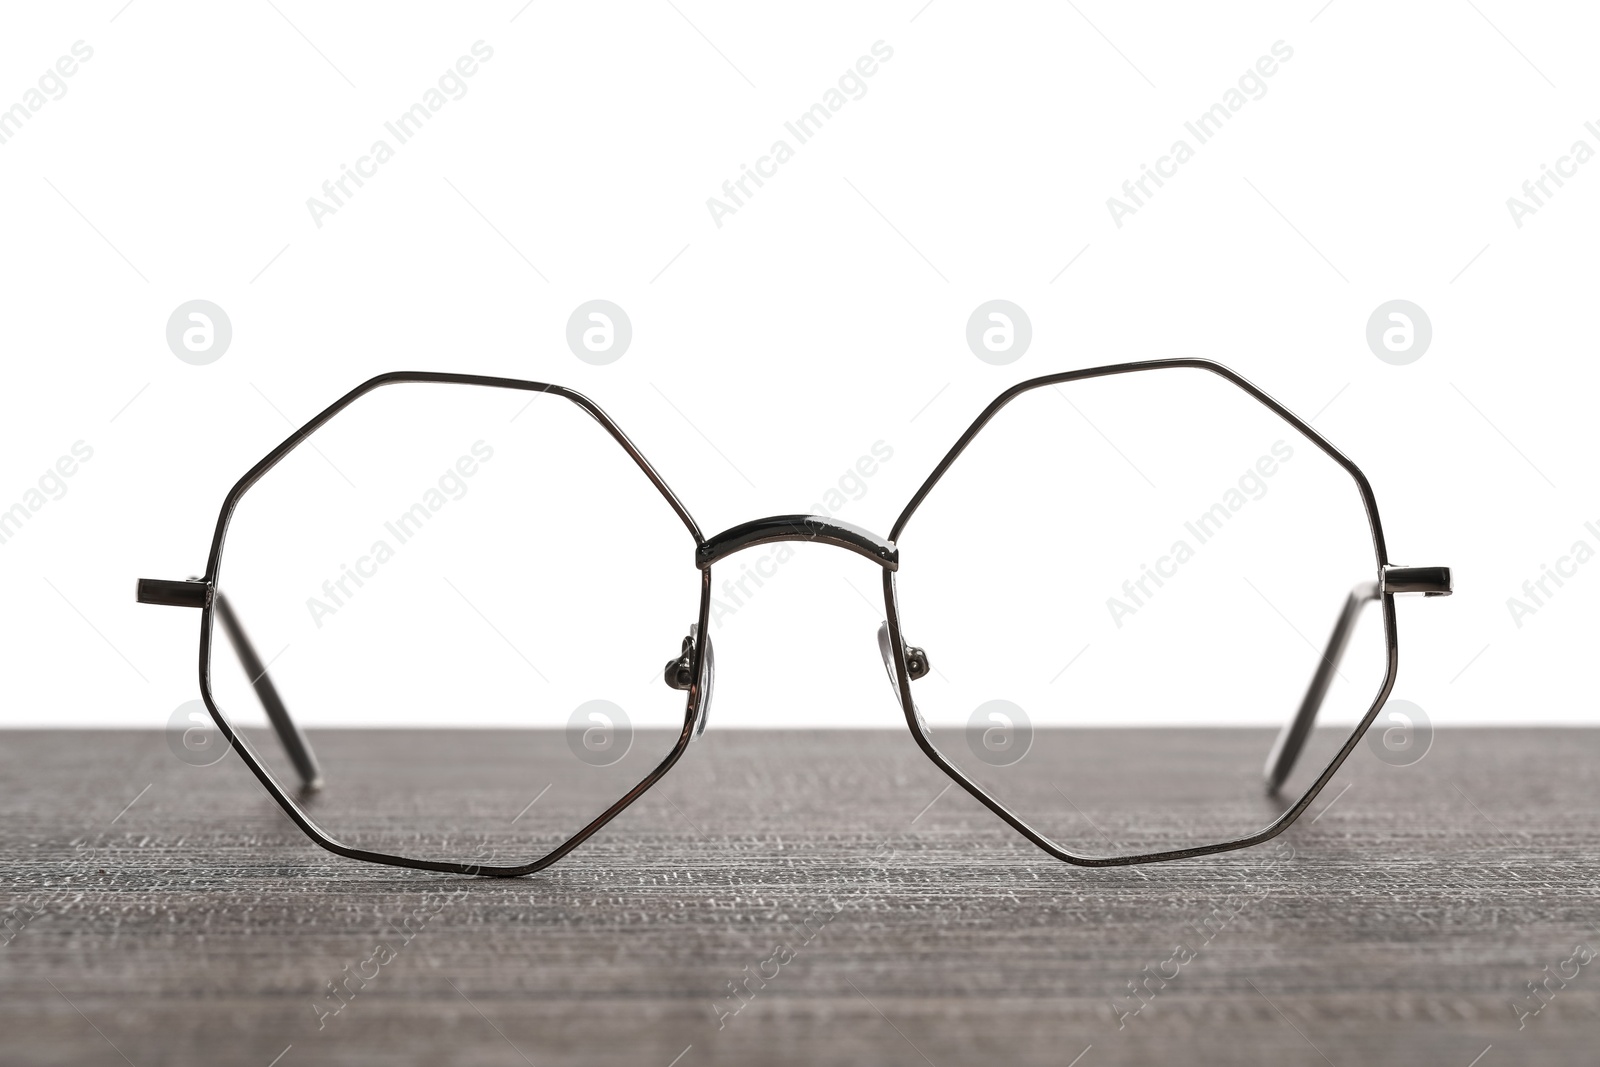 Photo of Stylish glasses with metal frame on wooden table against white background